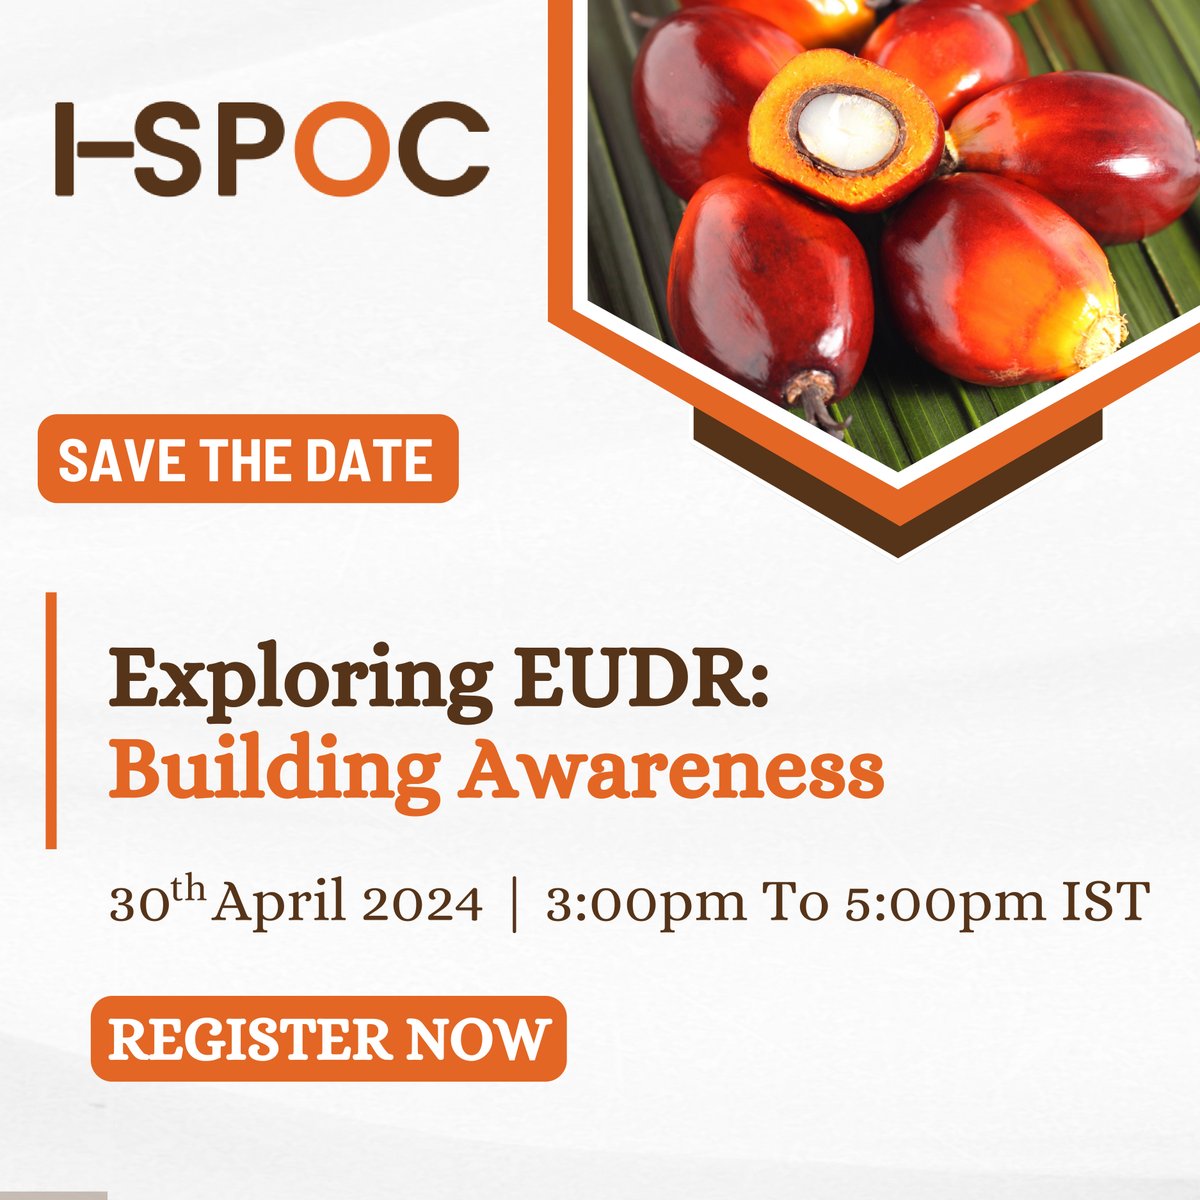 #WorkshopAlert #HappeningTomorrow

Join us for an insightful workshop on - ”Exploring EUDR: Building Awareness”, as we delve into the global value chain of palm oil, uncovering the risks and opportunities for India, also don't miss out on gaining valuable insights and actionable…